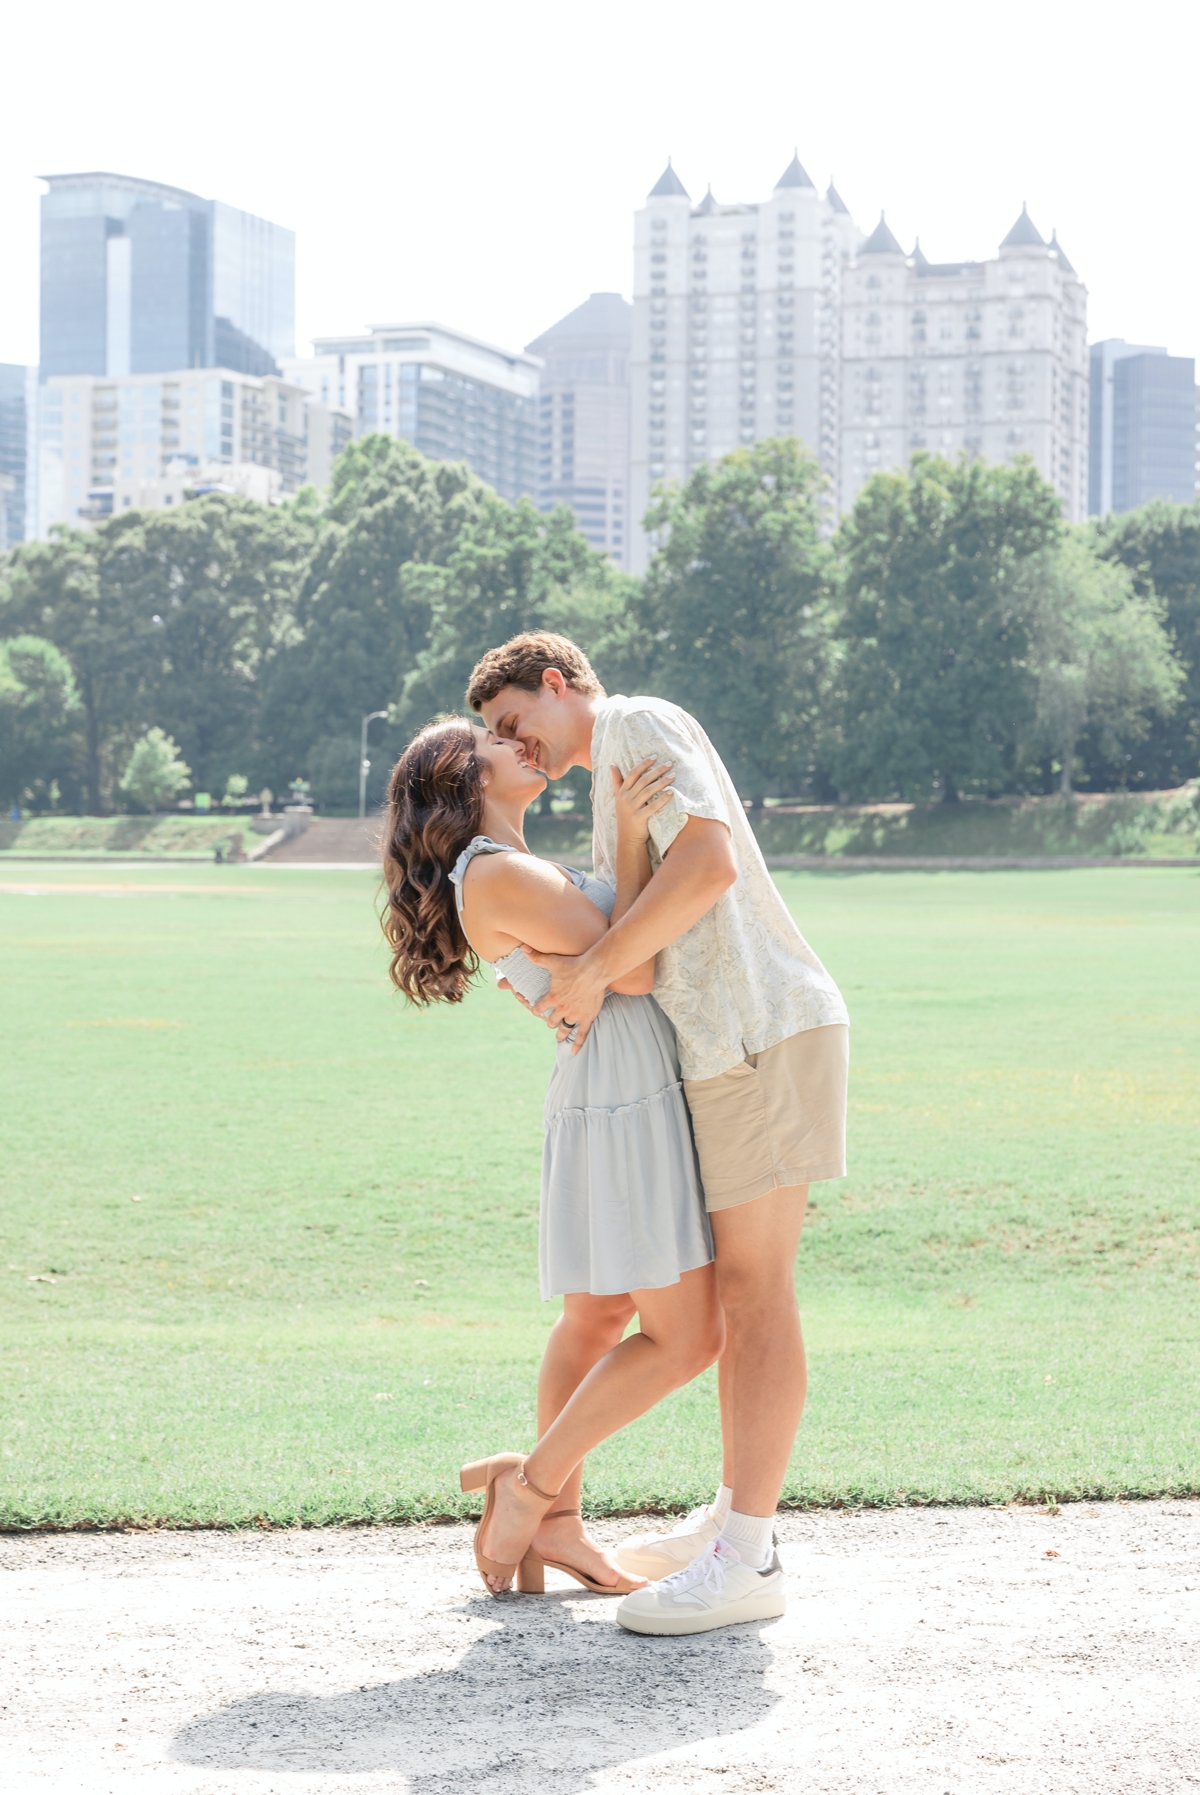 Isaac kissing Brooke while he dips her back in Piedmont Park overlooking the city.